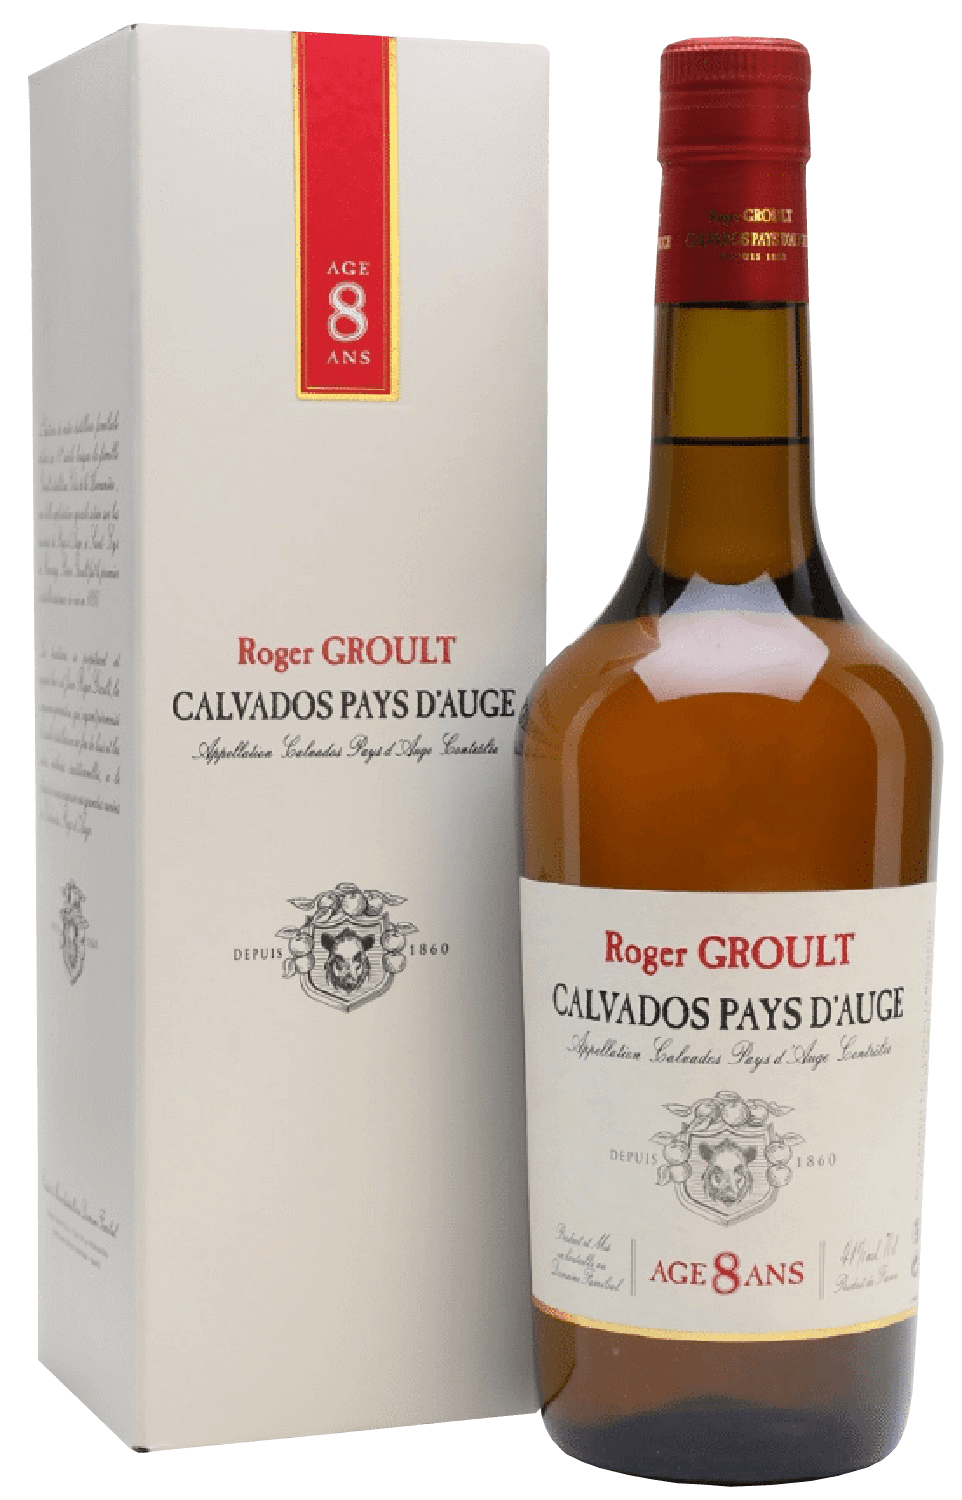 Calvados Pays D'Auge AOC 8 ans Roger Groult (gift box) age d or calvados pays d auge aoc roger groult gift box